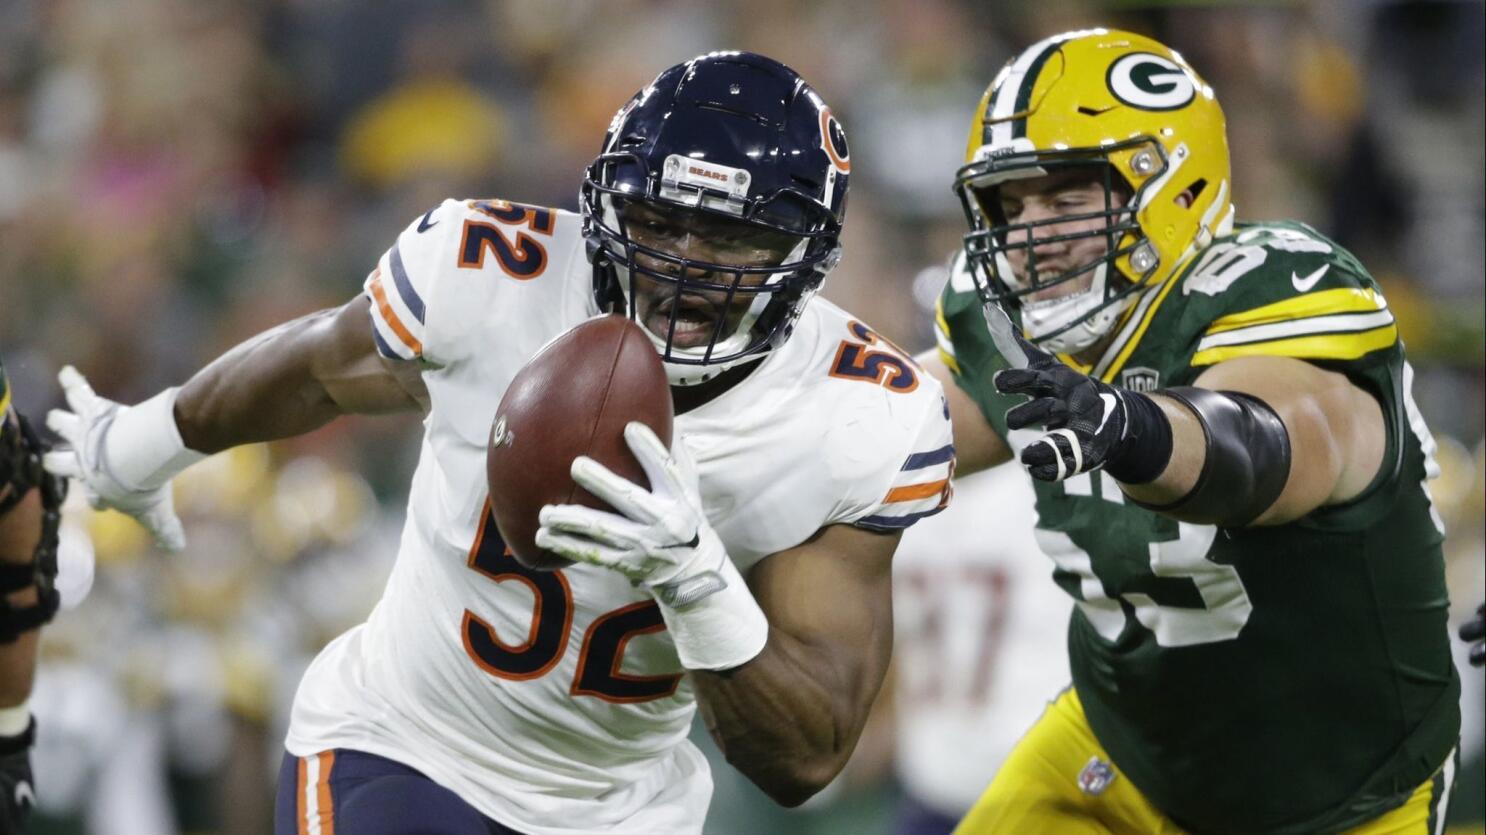 Reports: Packers and Bears to open 2019 NFL season instead of